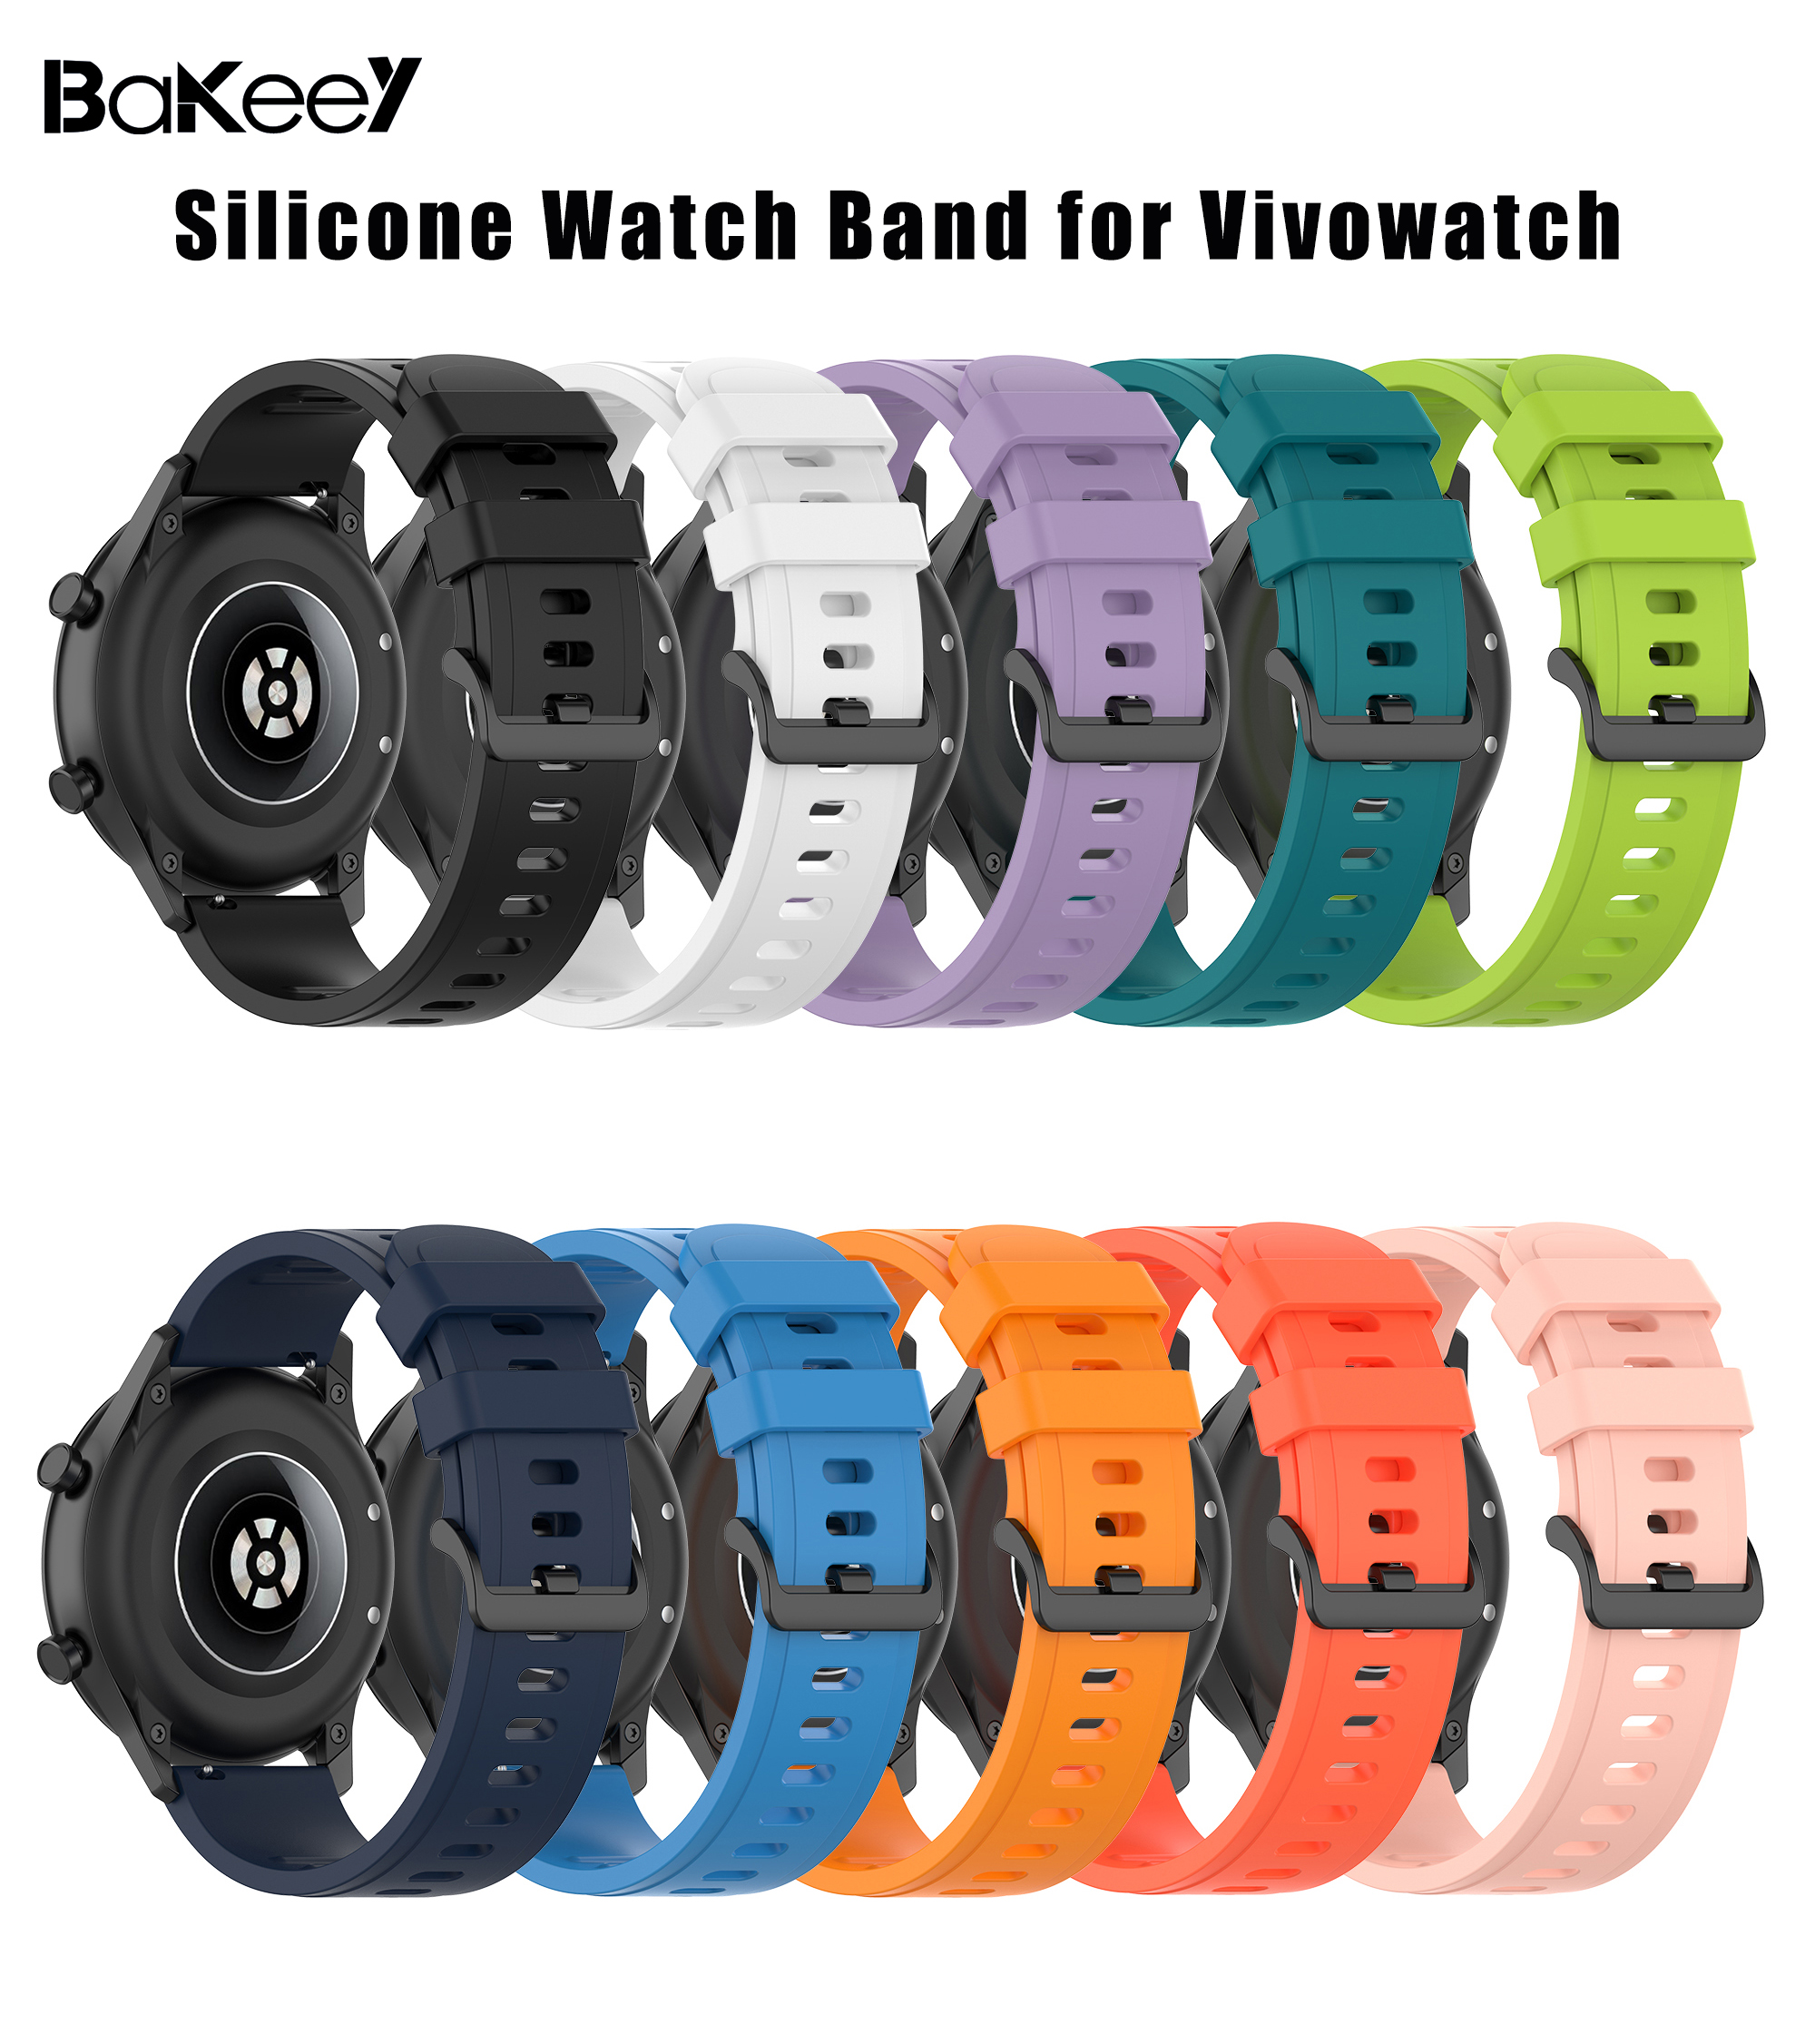 Bakeey-2022mm-Pure-Color-Sweatproof-Soft-Silicone-Watch-Band-Strap-Replacement-for-Garmin-Vivowatch-1773645-1